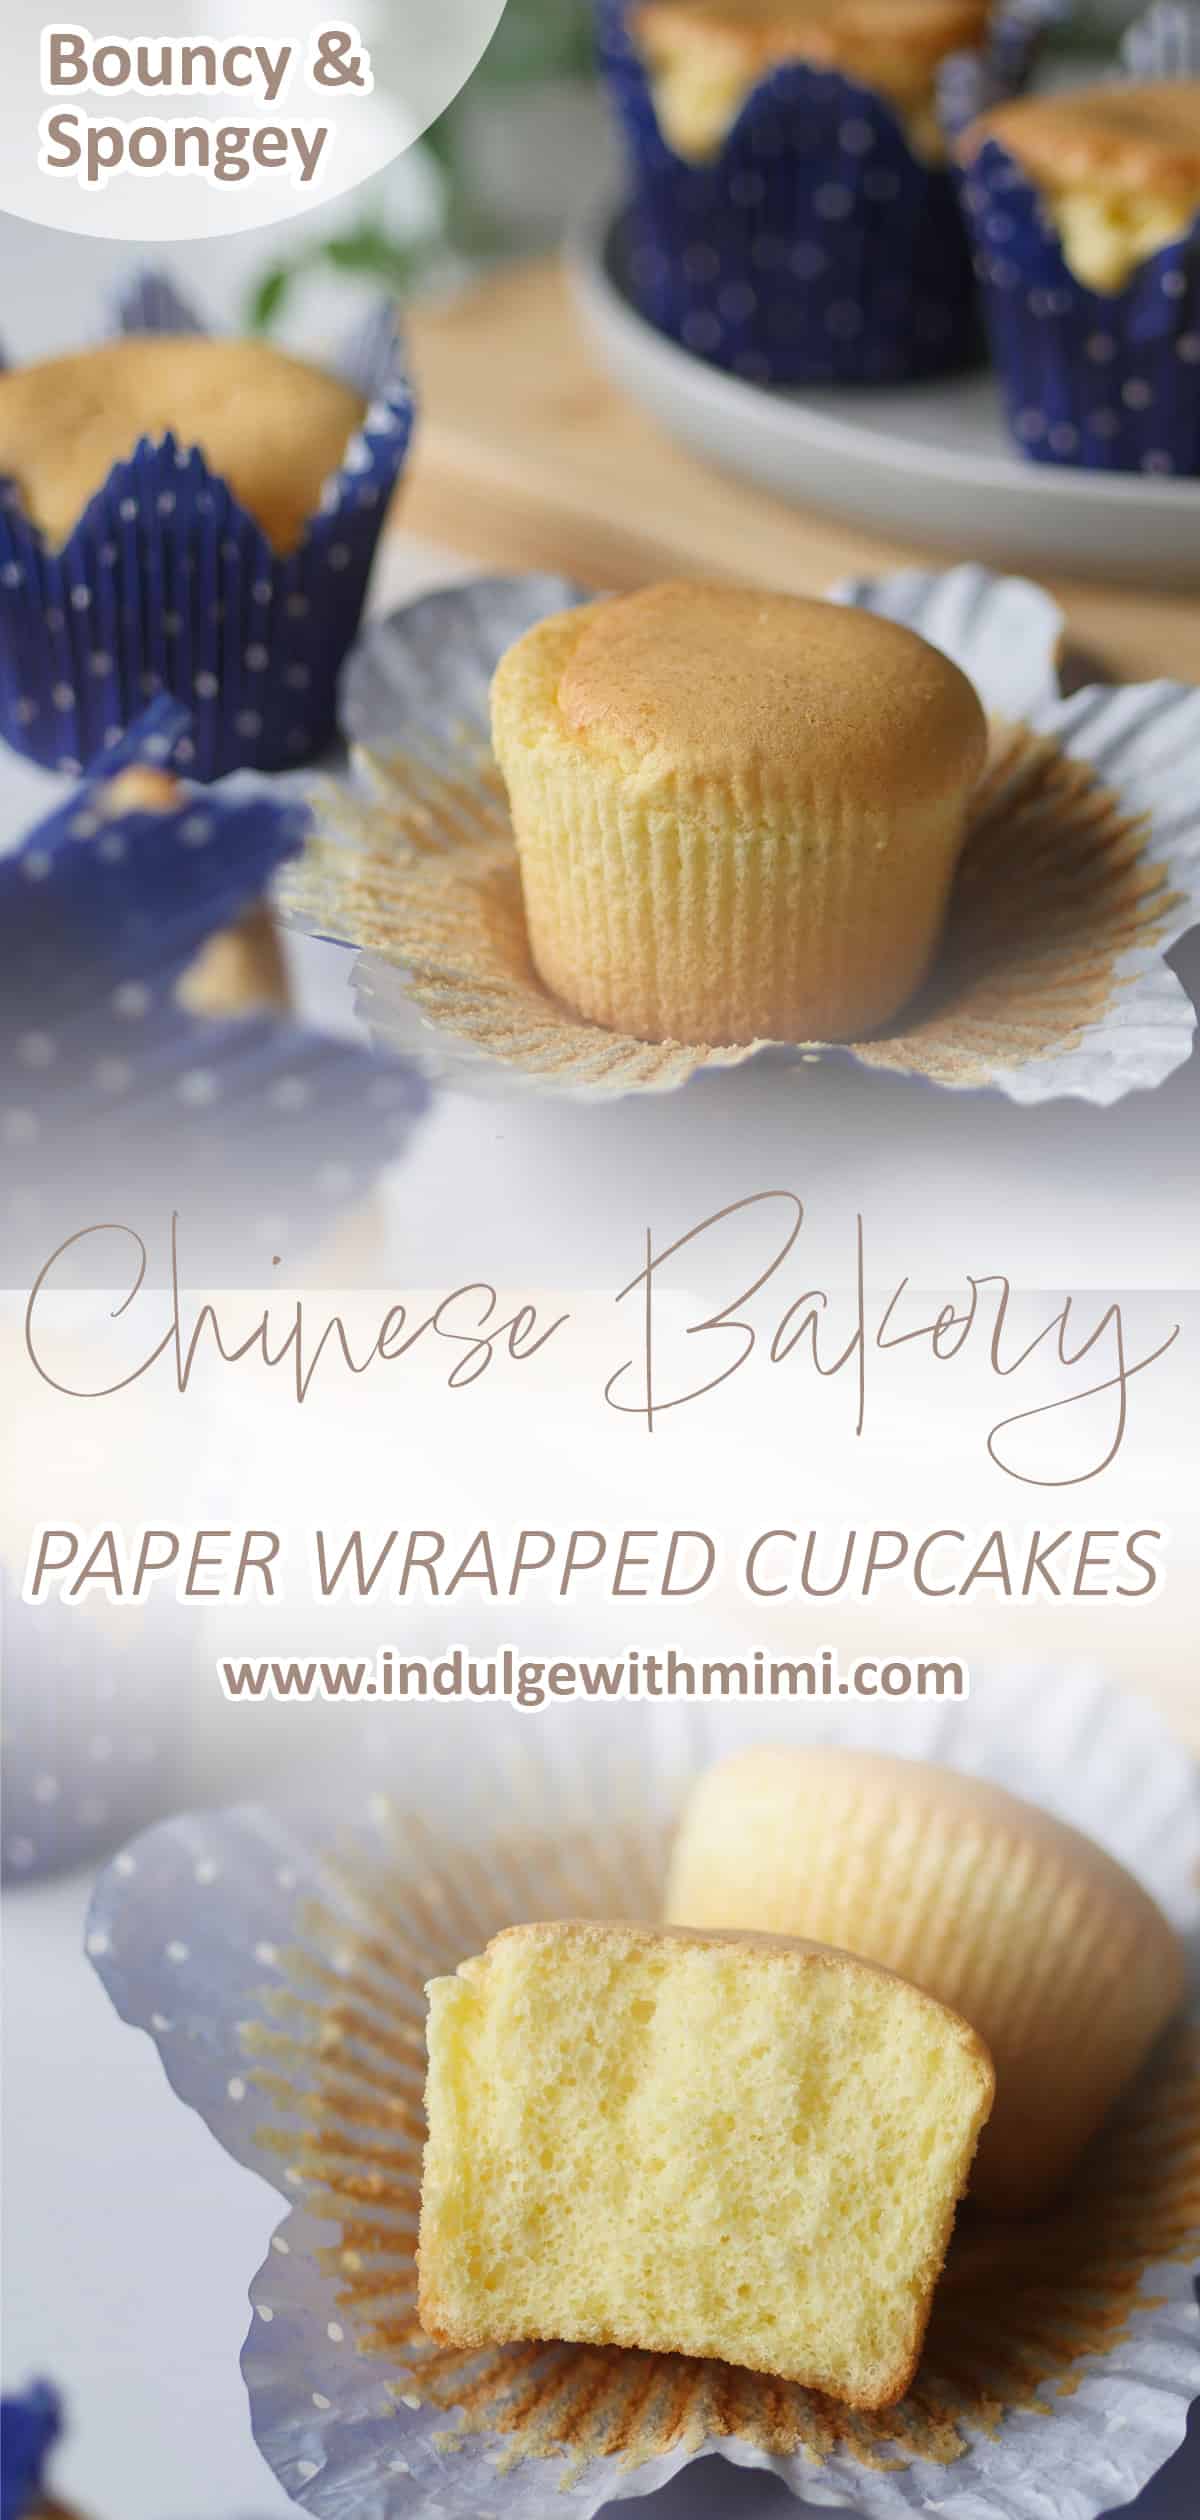 Unwrapped Chinese paper cupcakes with golden skin showing. 